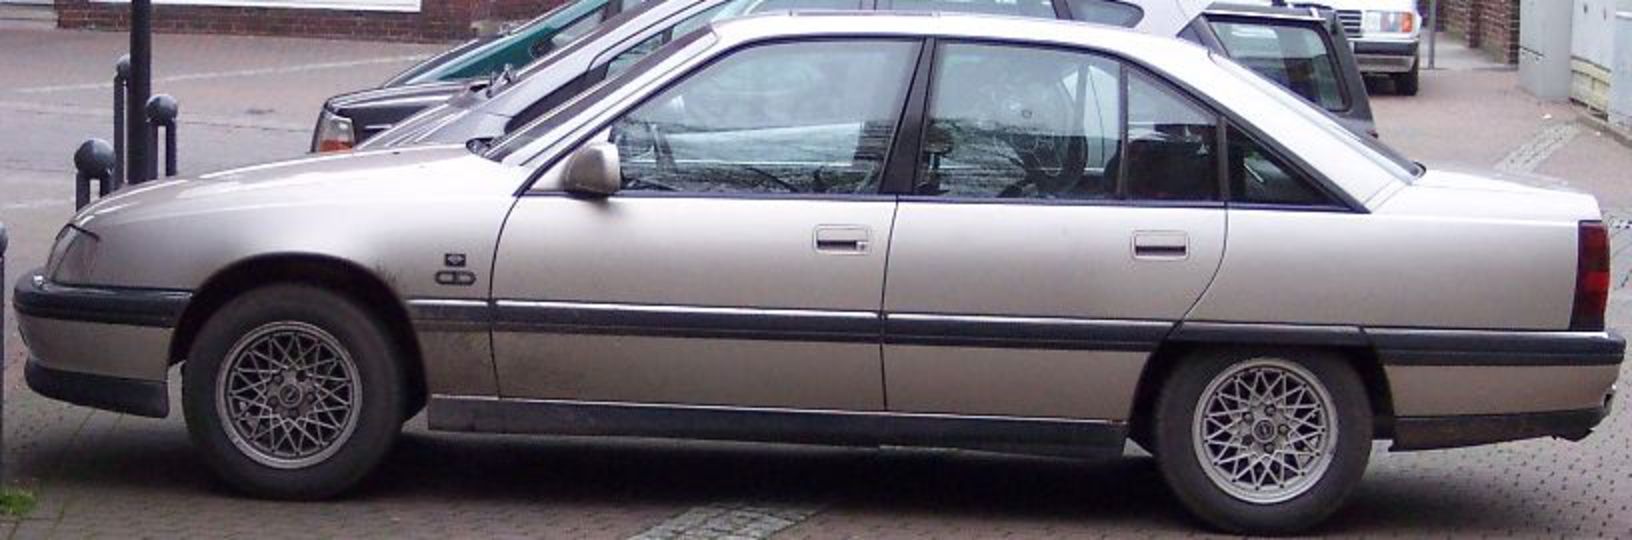 Opel omega 2.6 (741 comments) Views 31318 Rating 73